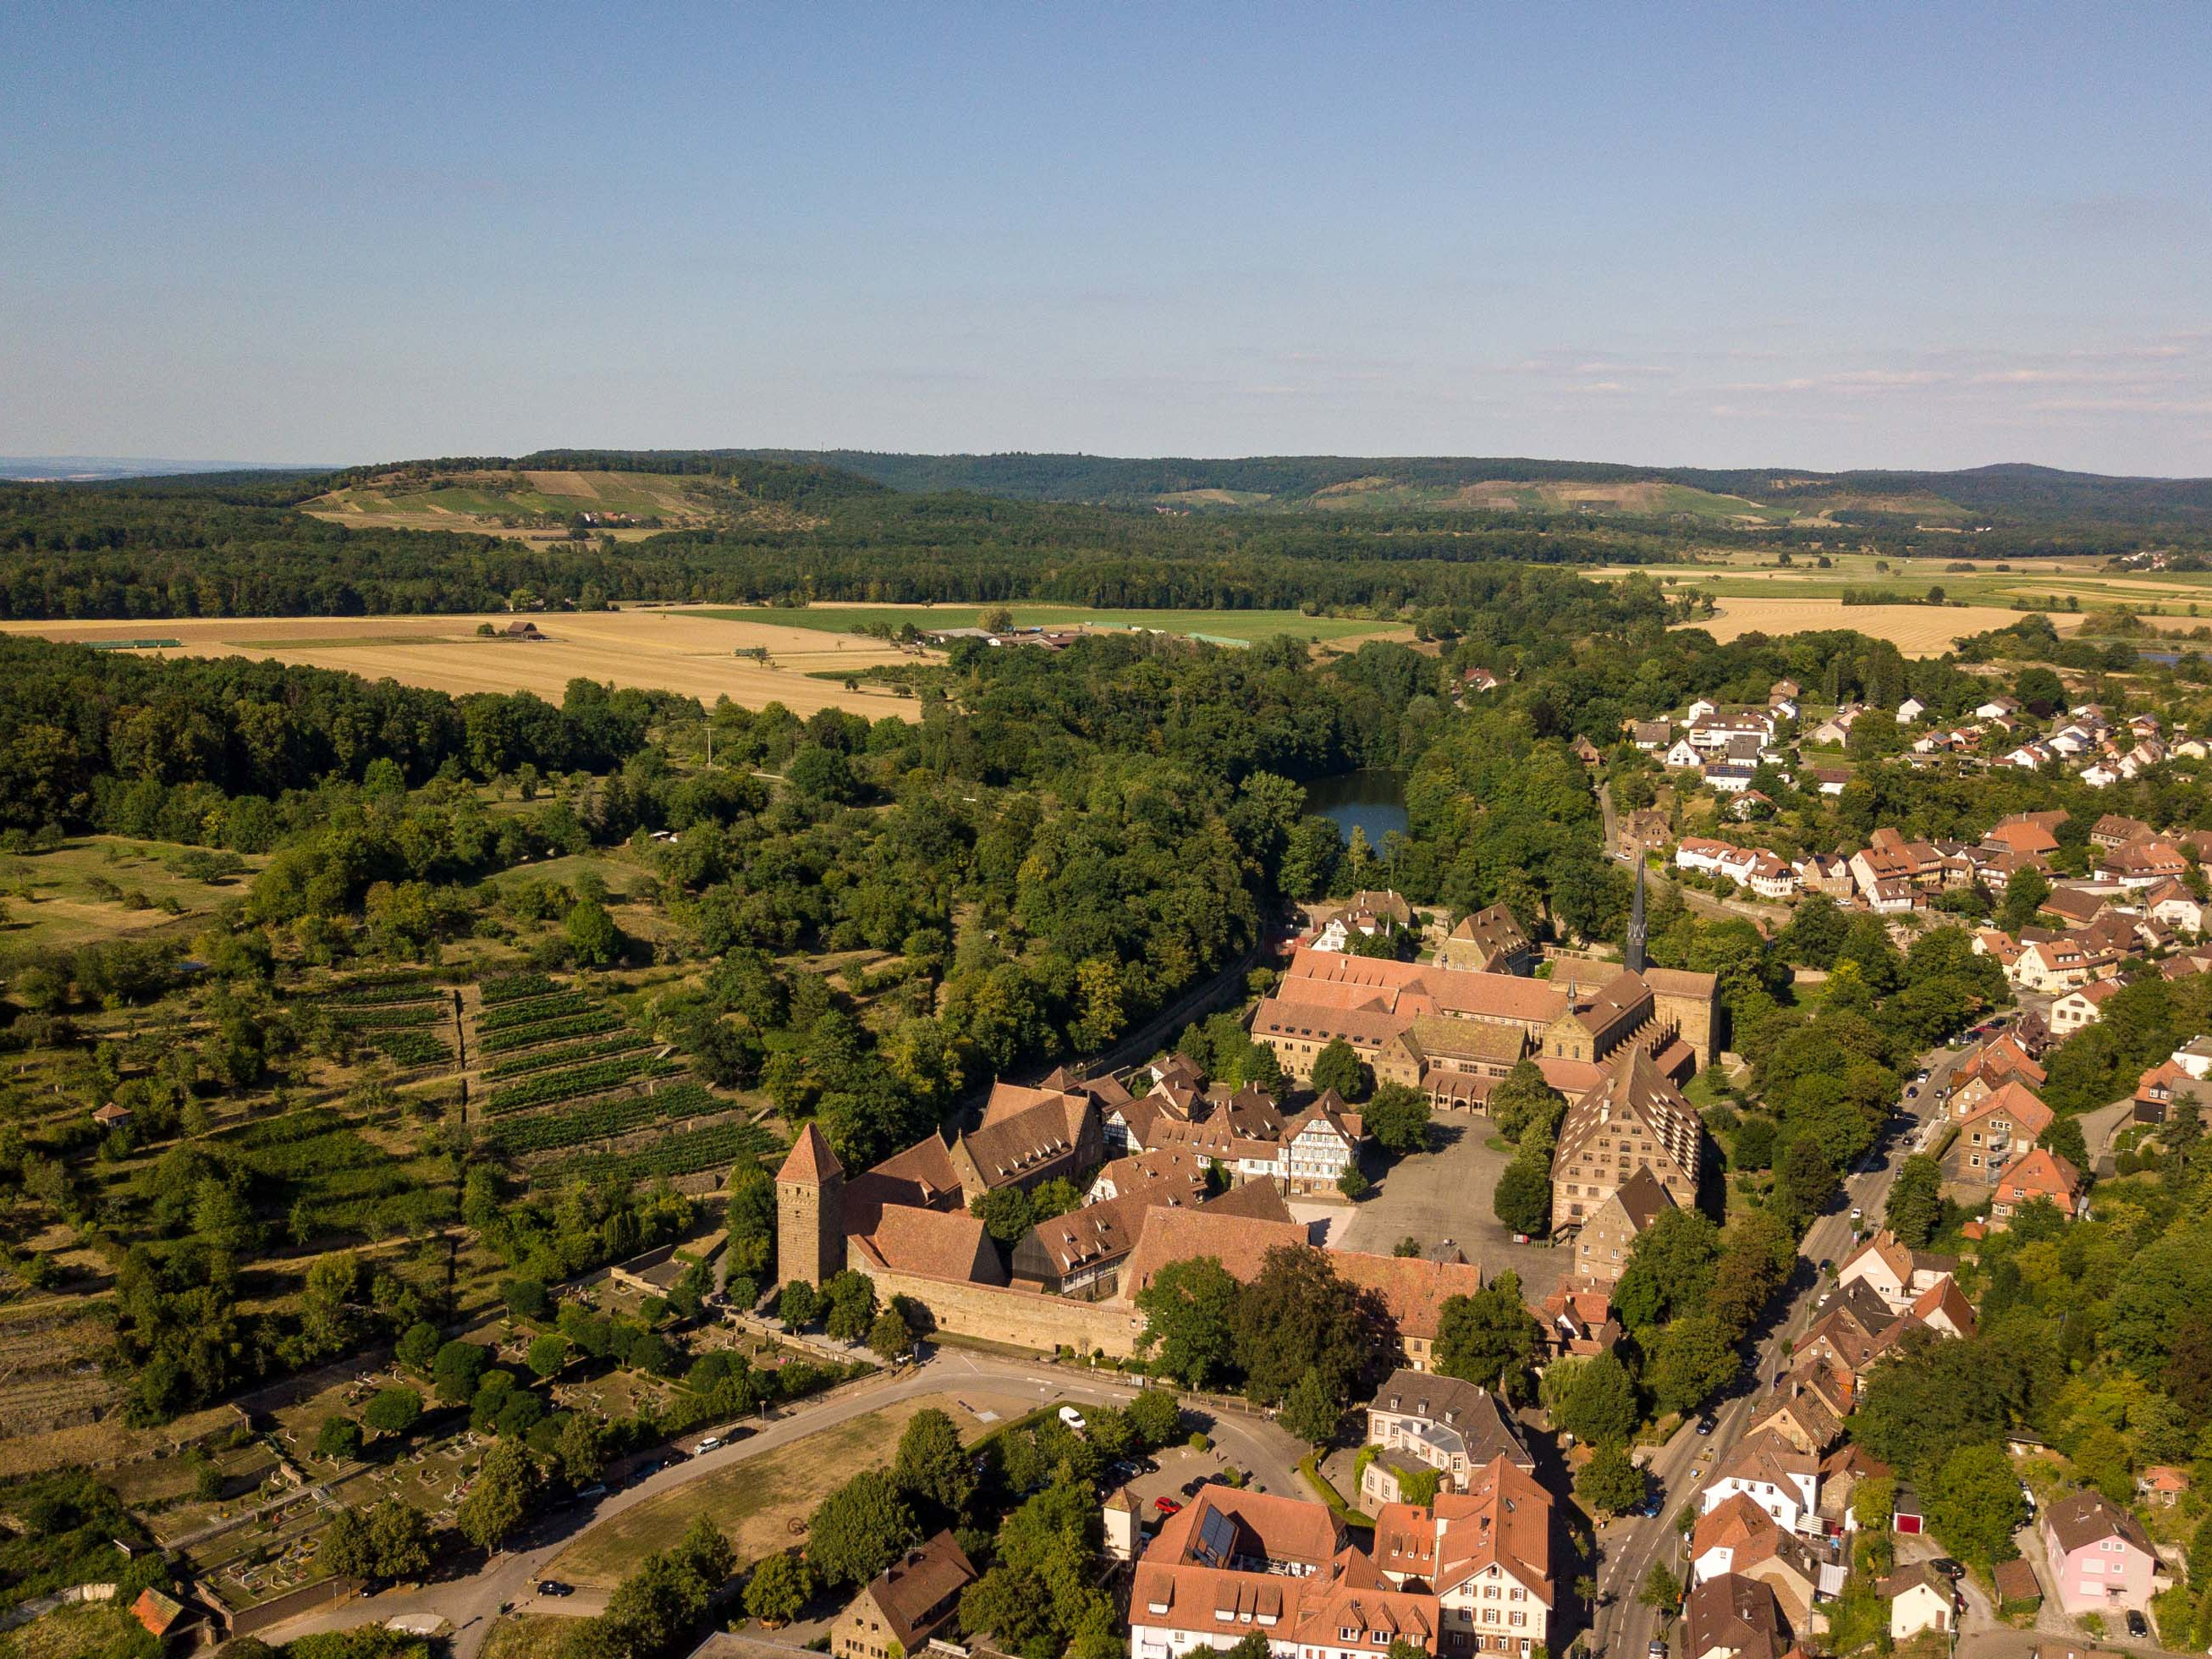 Kloster Maulbronn, Tiefer See, Rossweiher © Sohl Media